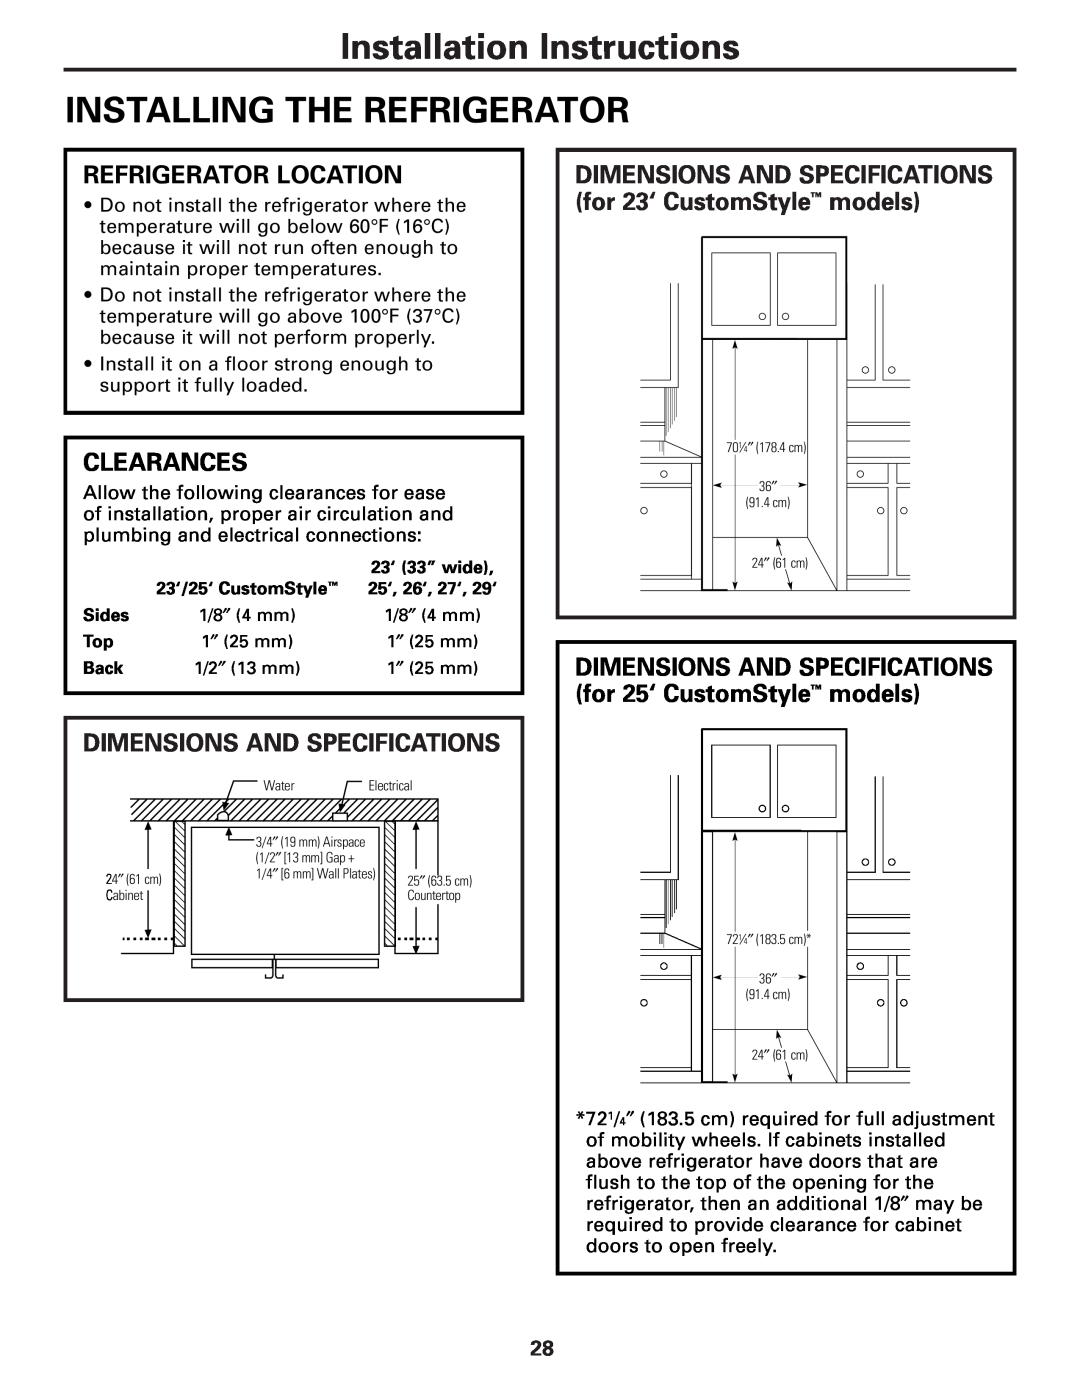 GE 49-60456, 200D8074P009 Installing The Refrigerator, Refrigerator Location, Clearances, Dimensions And Specifications 